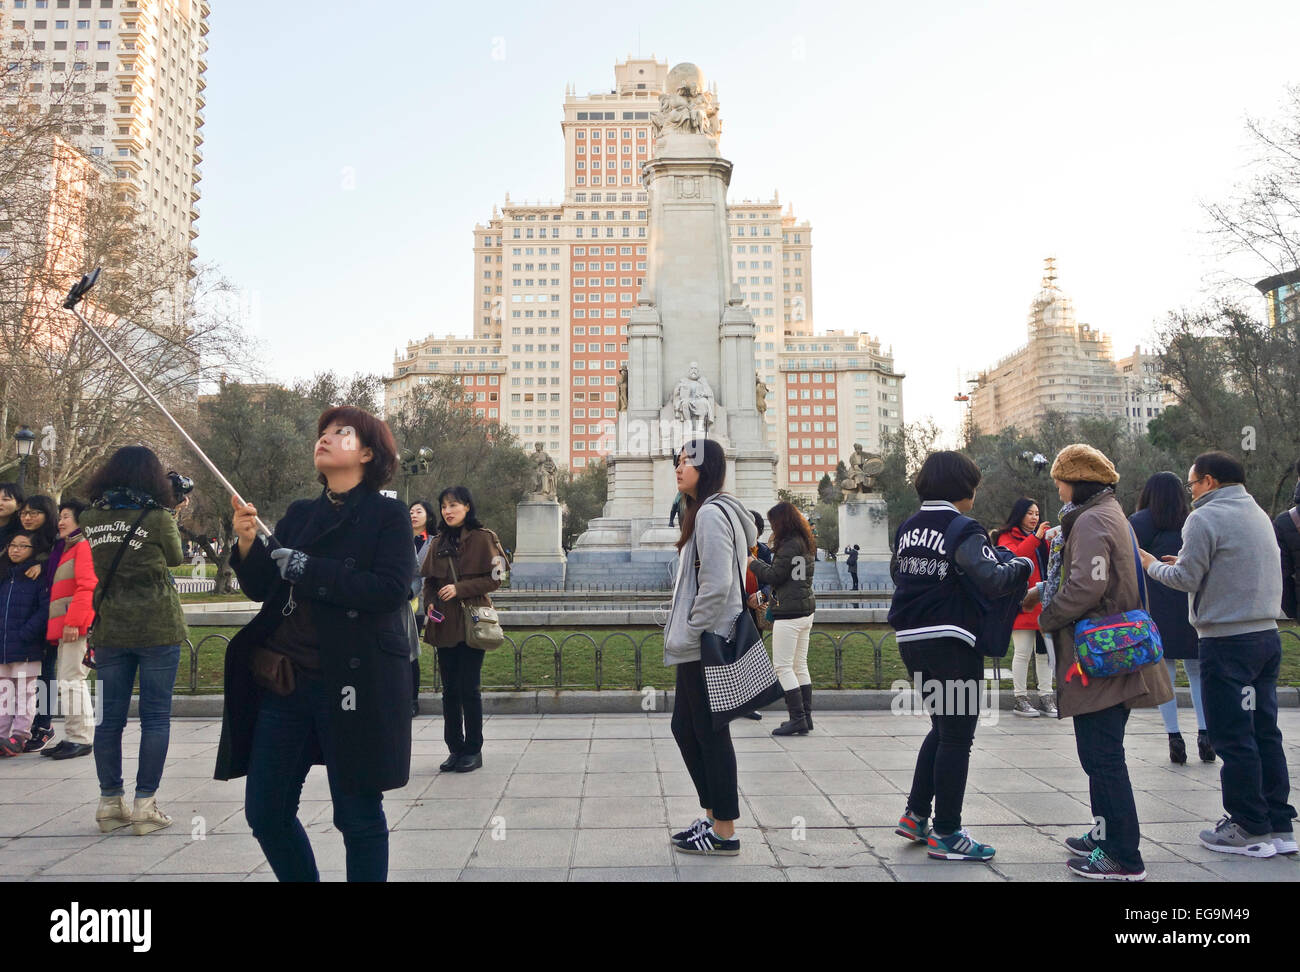 Madrid. Chinese tourists at Plaza de España, Square of Spain, with monument to Miguel de Cervantes, Madrid, Spain. Stock Photo